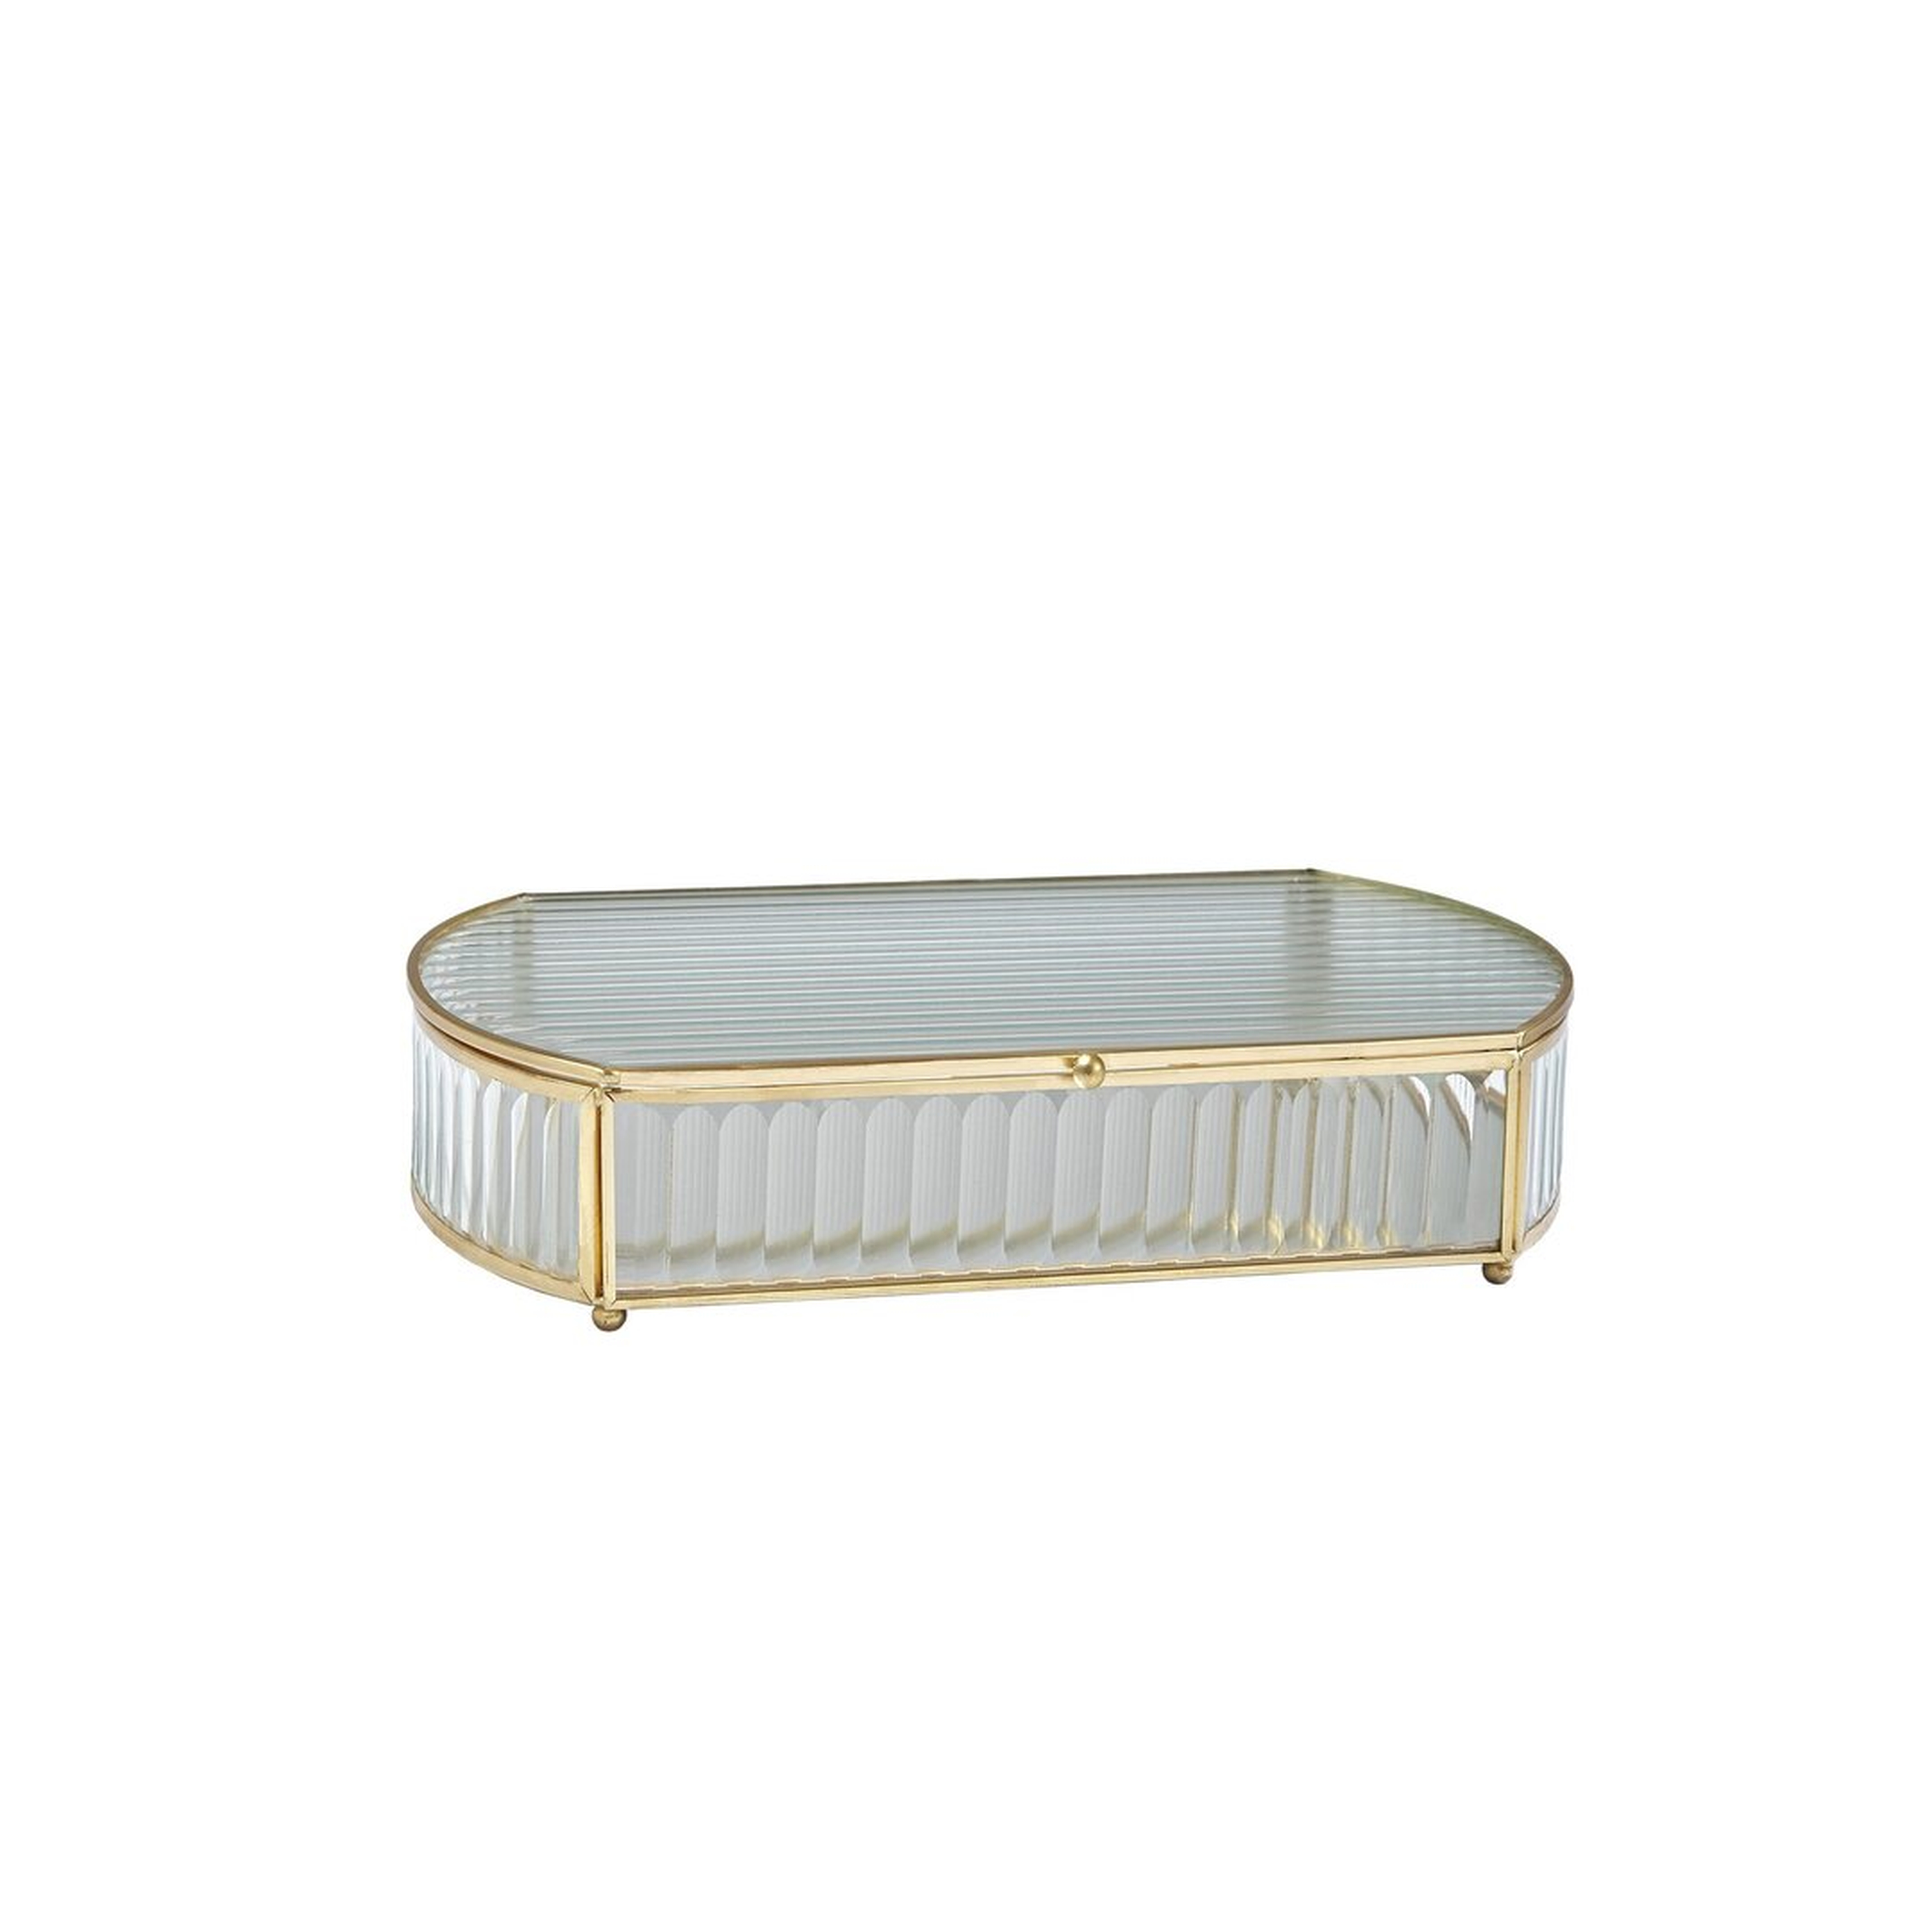 Global Views Reeded Glass Oval Box - Perigold